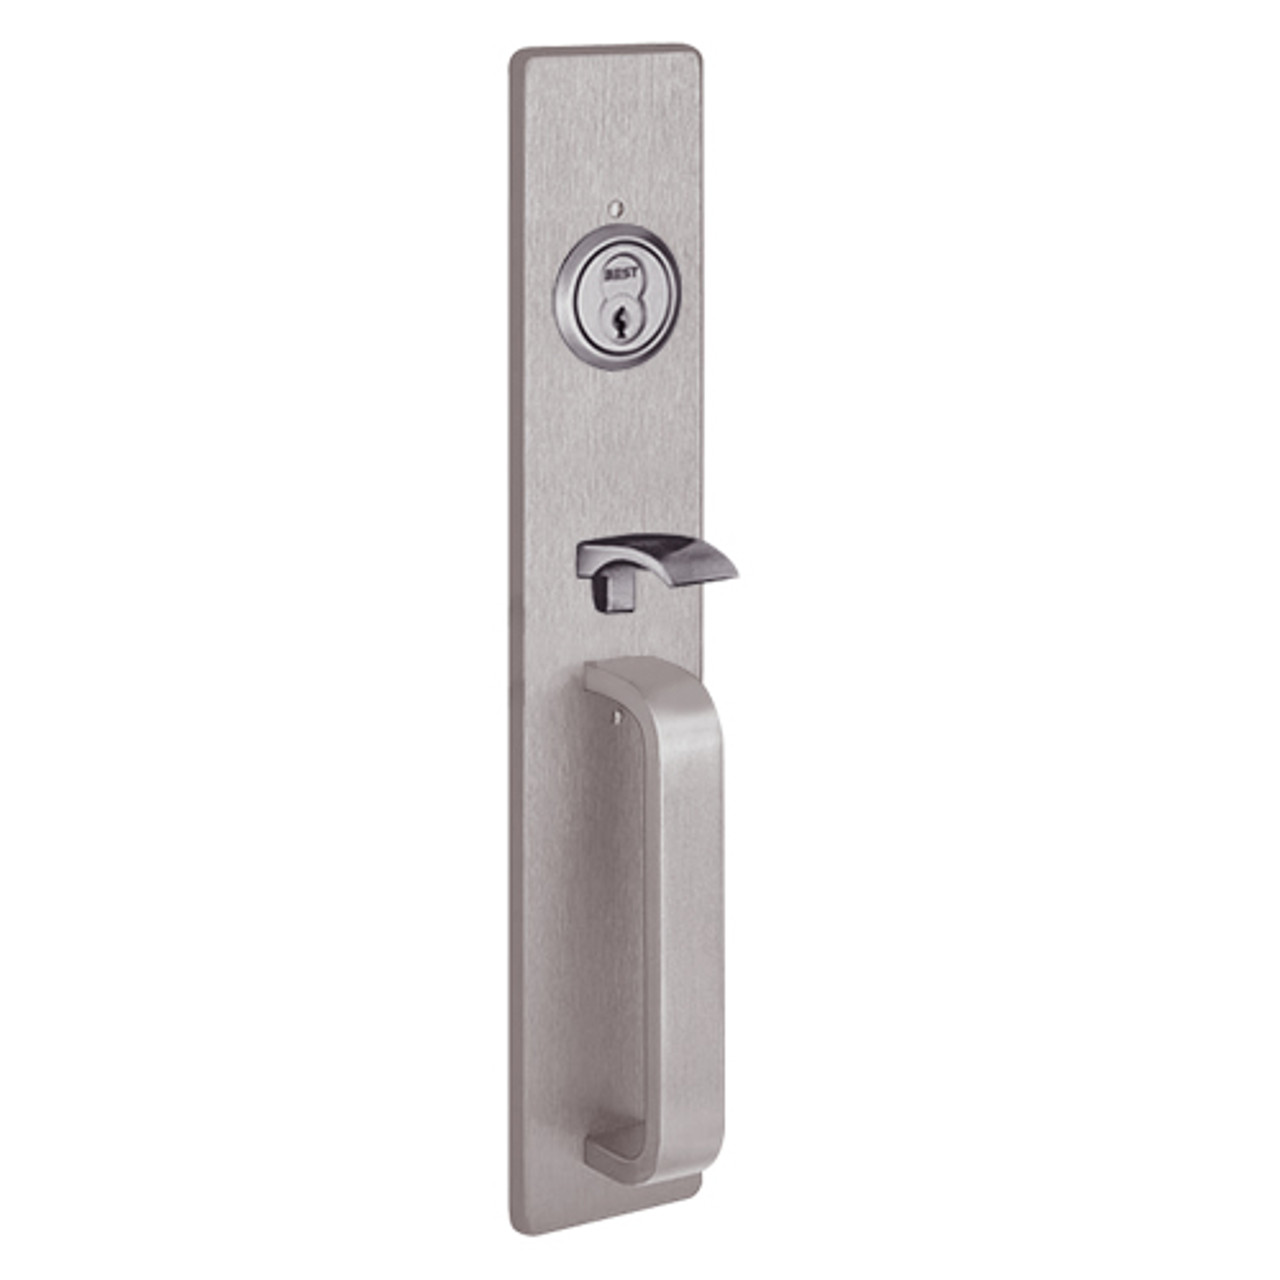 R1705A-630 PHI Key Controls Thumb Piece Retrofit Trim with A Design Pull for Apex and Olympian Series Exit Device in Satin Stainless Steel Finish